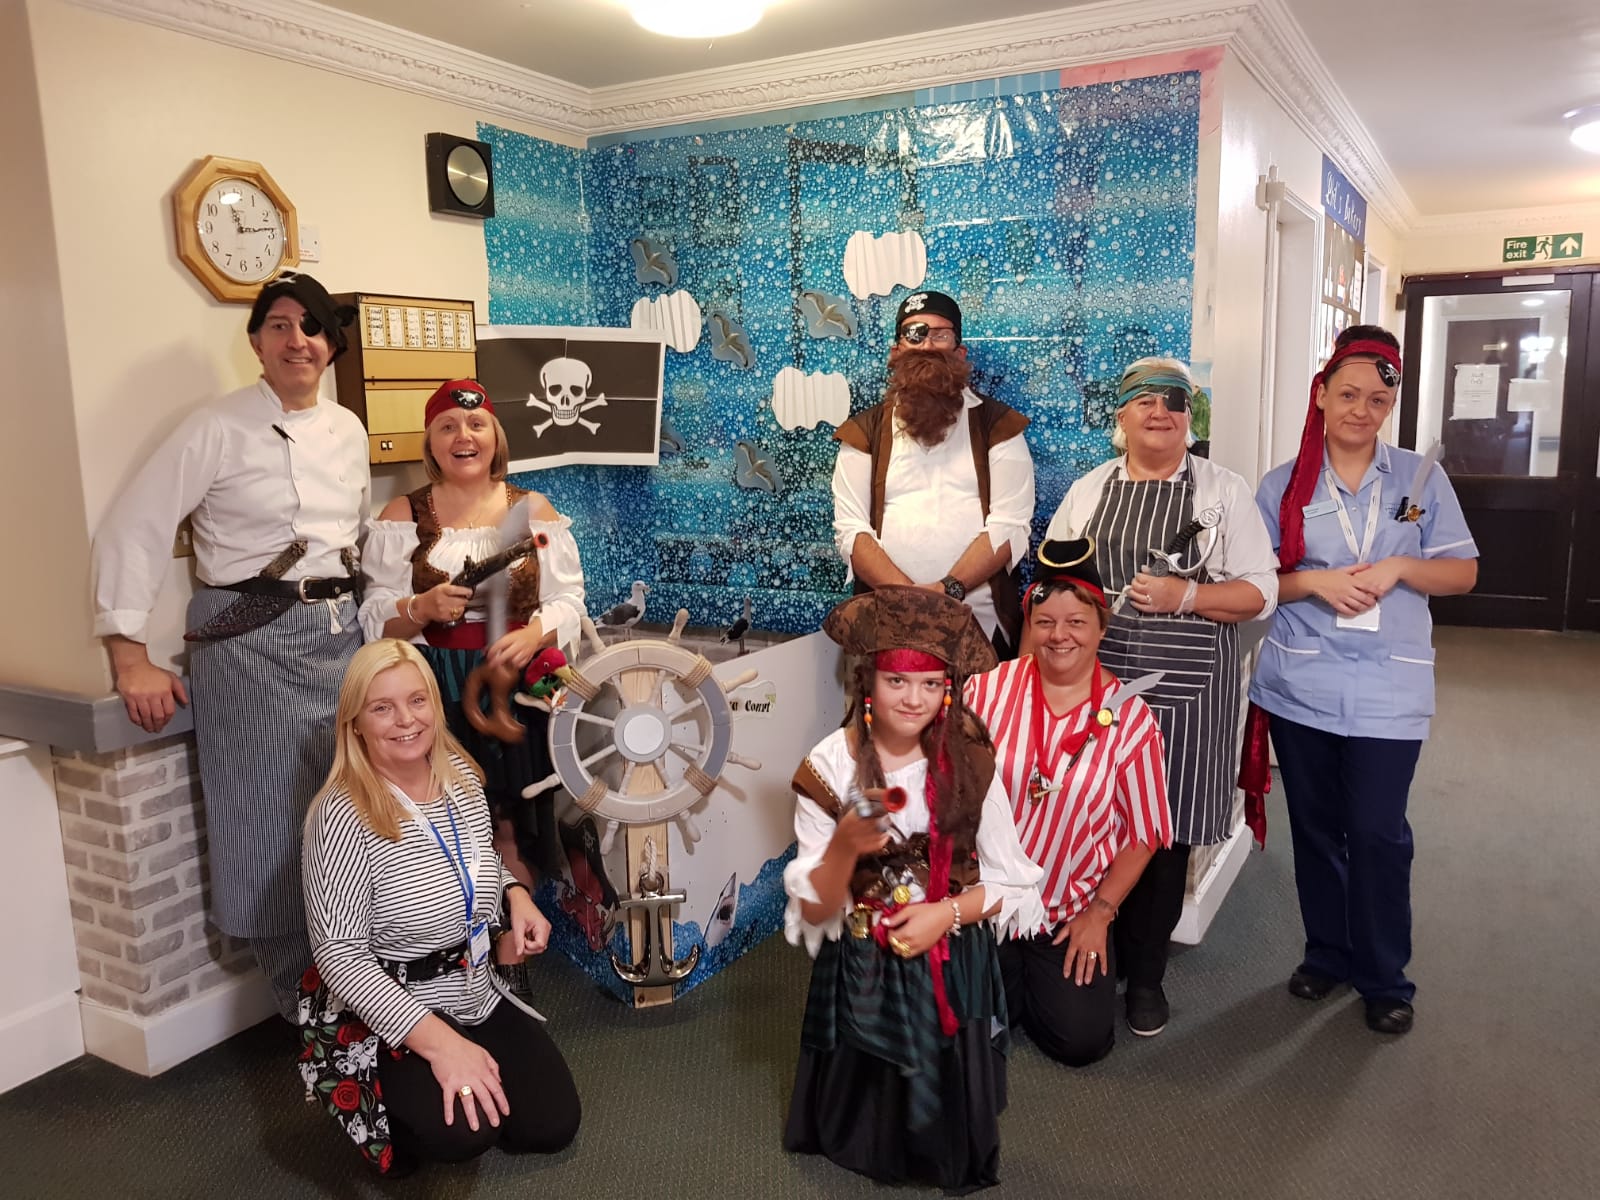 Pirate Themed Fancy Dress Party Elizabeth Court Care Centre: Key Healthcare is dedicated to caring for elderly residents in safe. We have multiple dementia care homes including our care home middlesbrough, our care home St. Helen and care home saltburn. We excel in monitoring and improving care levels.